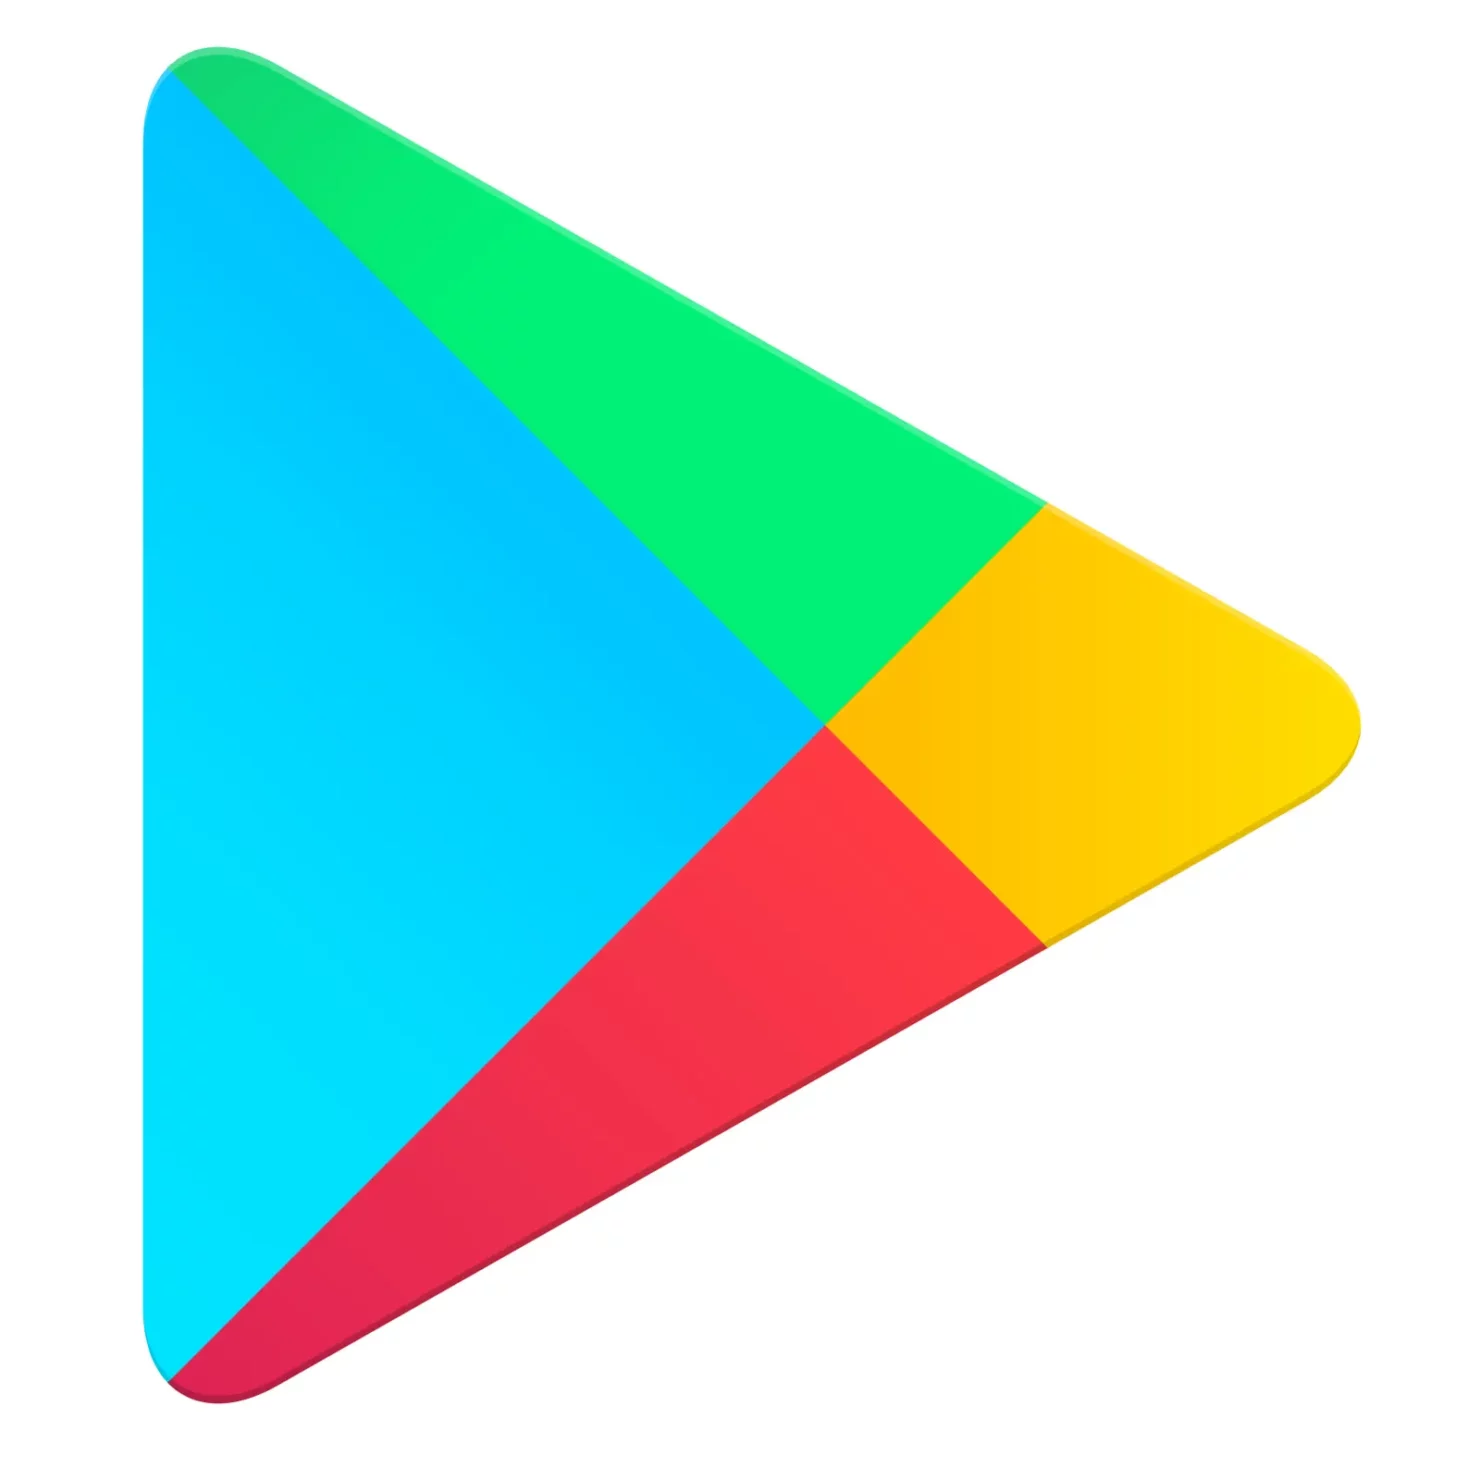 current-google-play-icon-1480x1480.webp